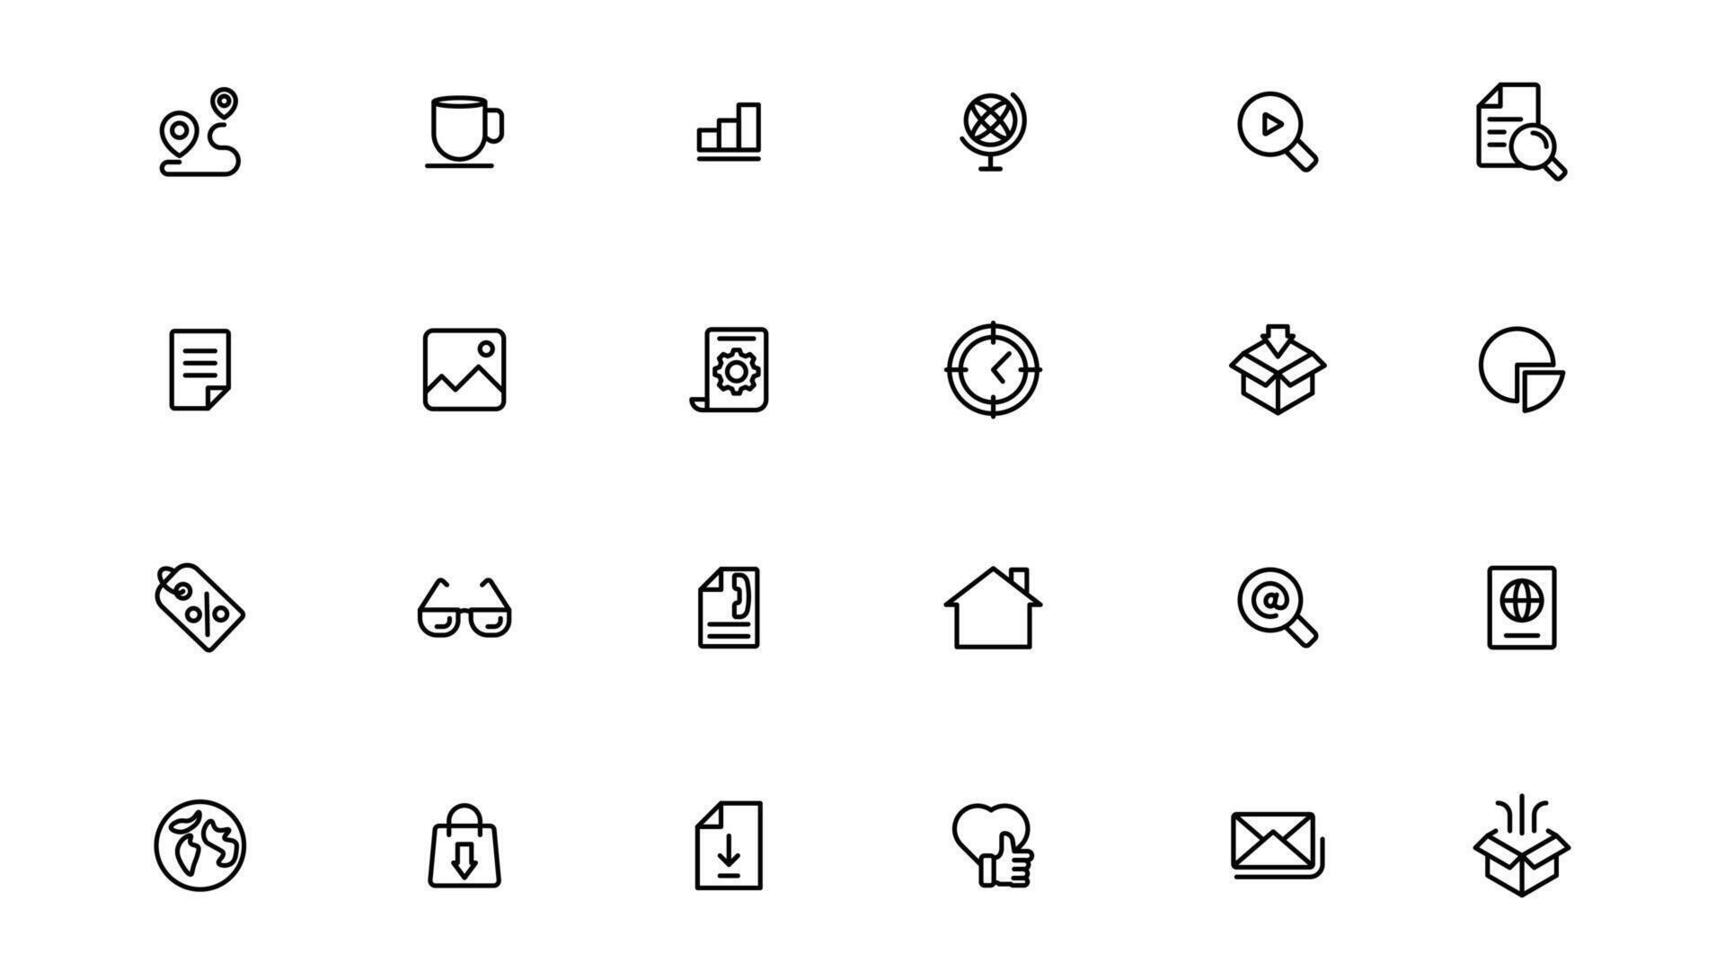 Digital Marketing web icons in line style. Social, networks, feedback, communication, marketing, ecommerce. vector